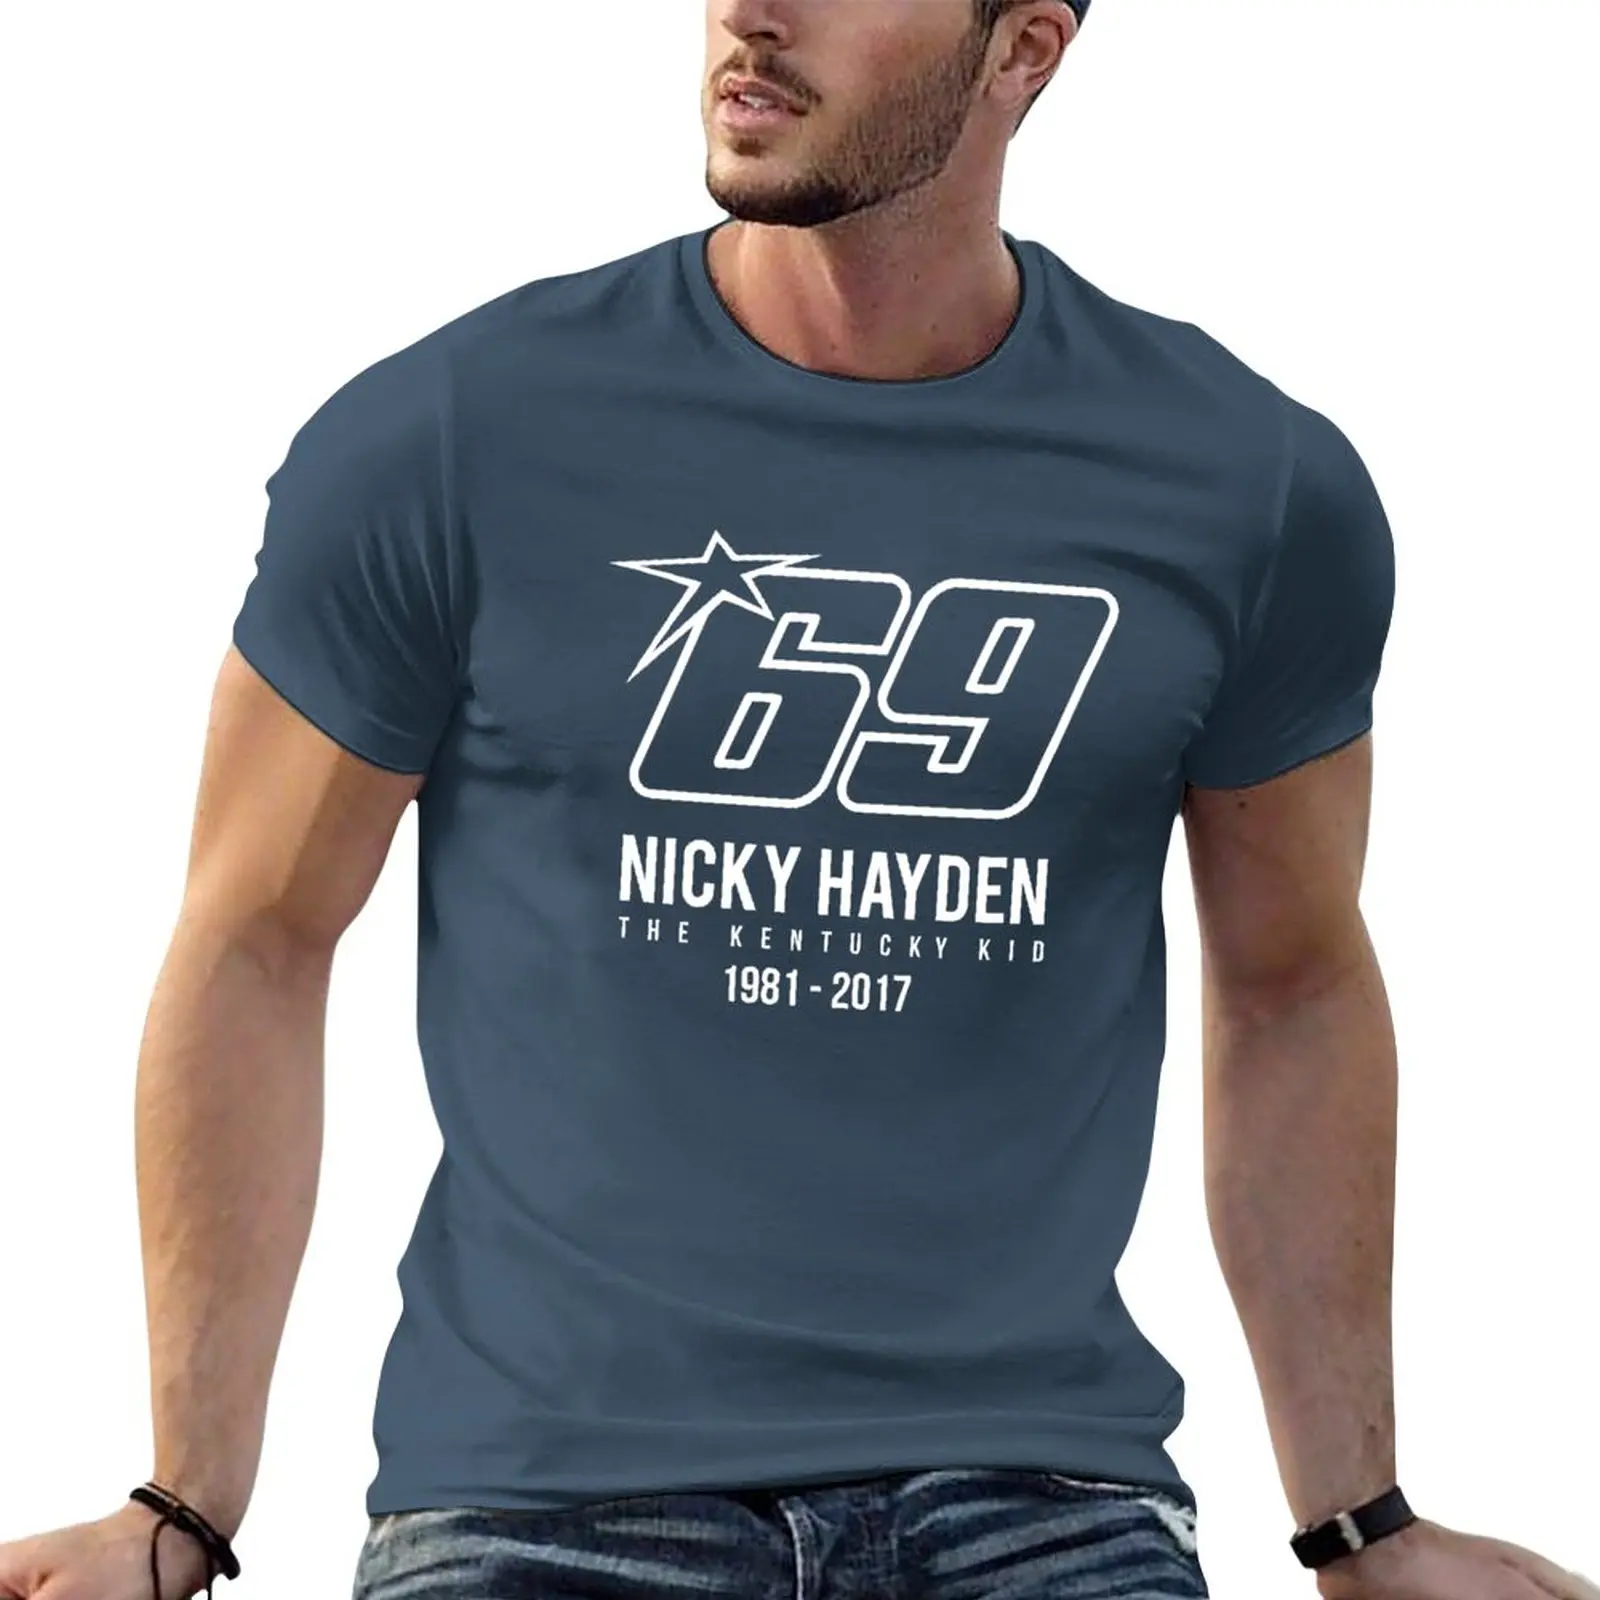 

Tribute To Nicky Hayden T-Shirt sublime t shirt Short sleeve tee plus size tops mens cotton t shirts